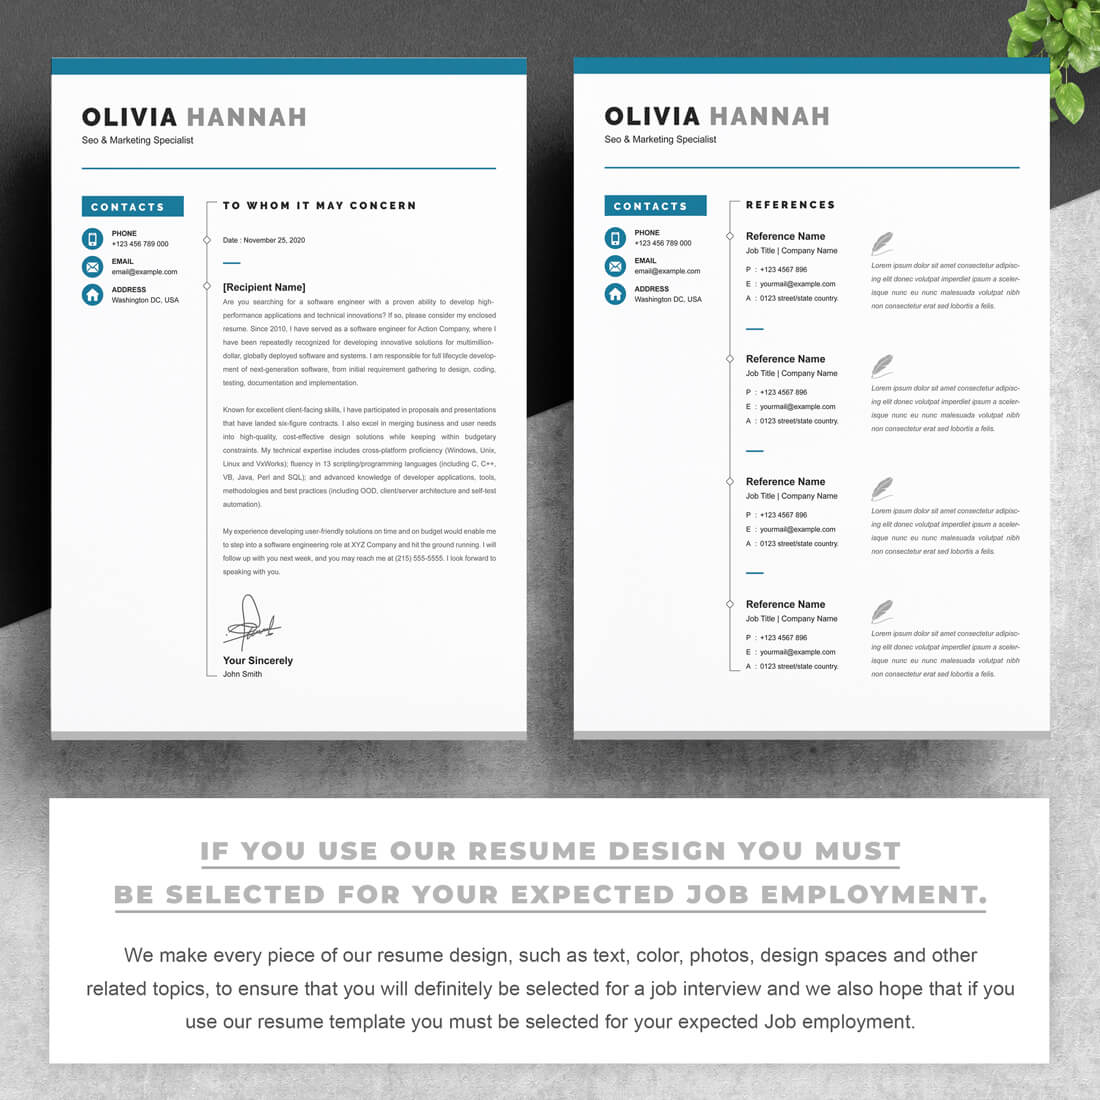 Two pages of the Seo & Marketing Specialist CV.